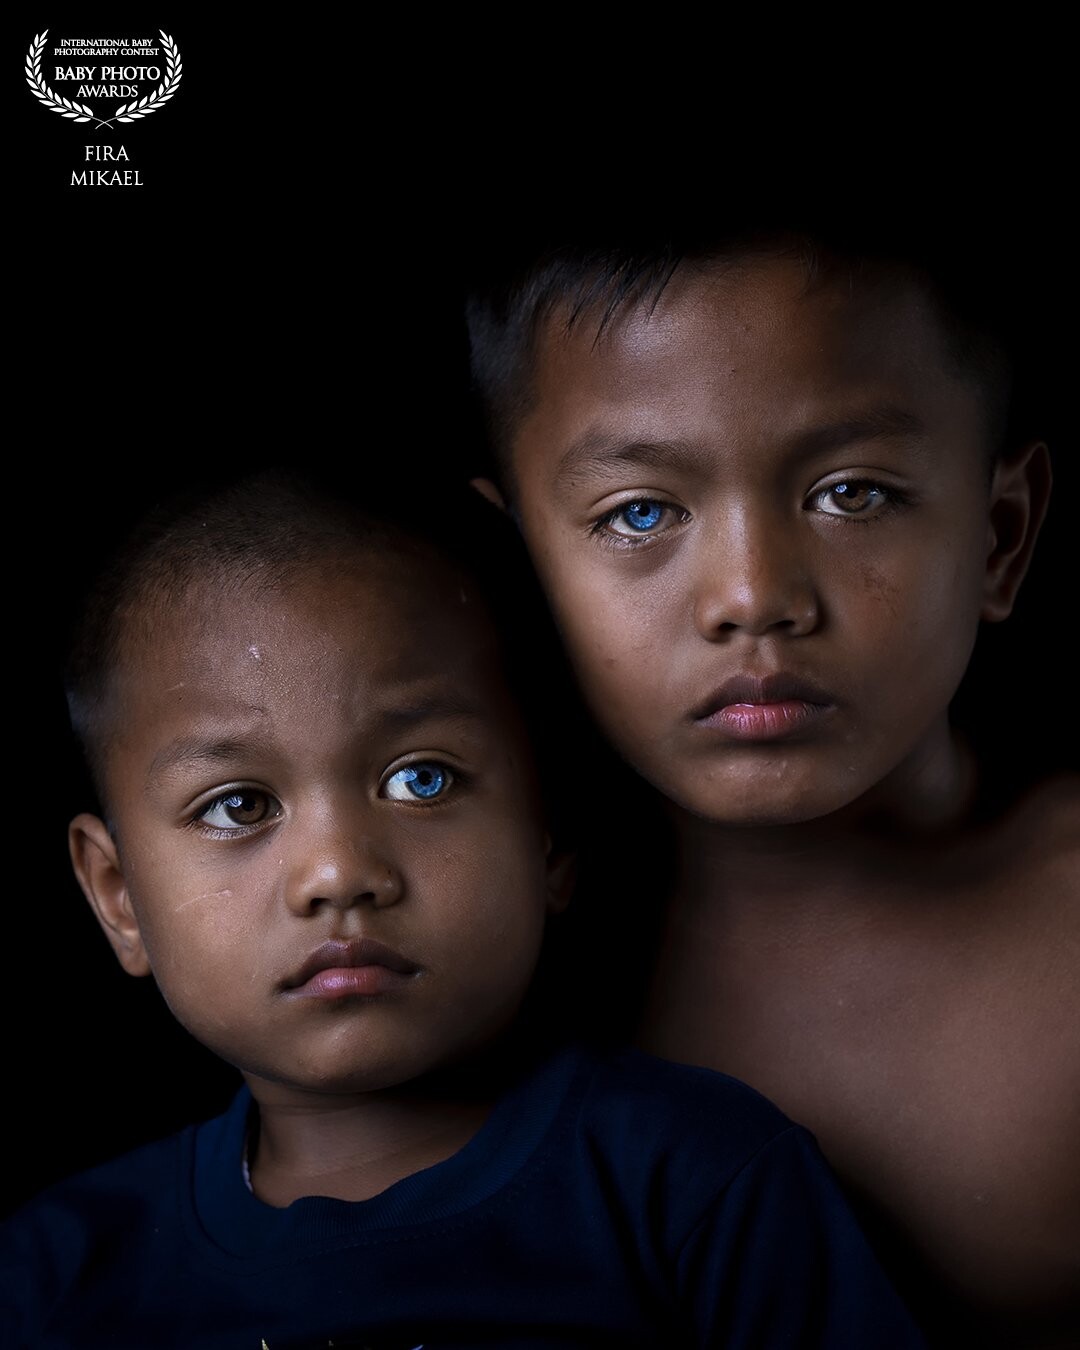 Fahri and Gofar are siblings who suffer from a genetic disorder called Waardenburg syndrome. This syndrome causes pupils to turn blue, lose hearing and lose the ability to speak for them.